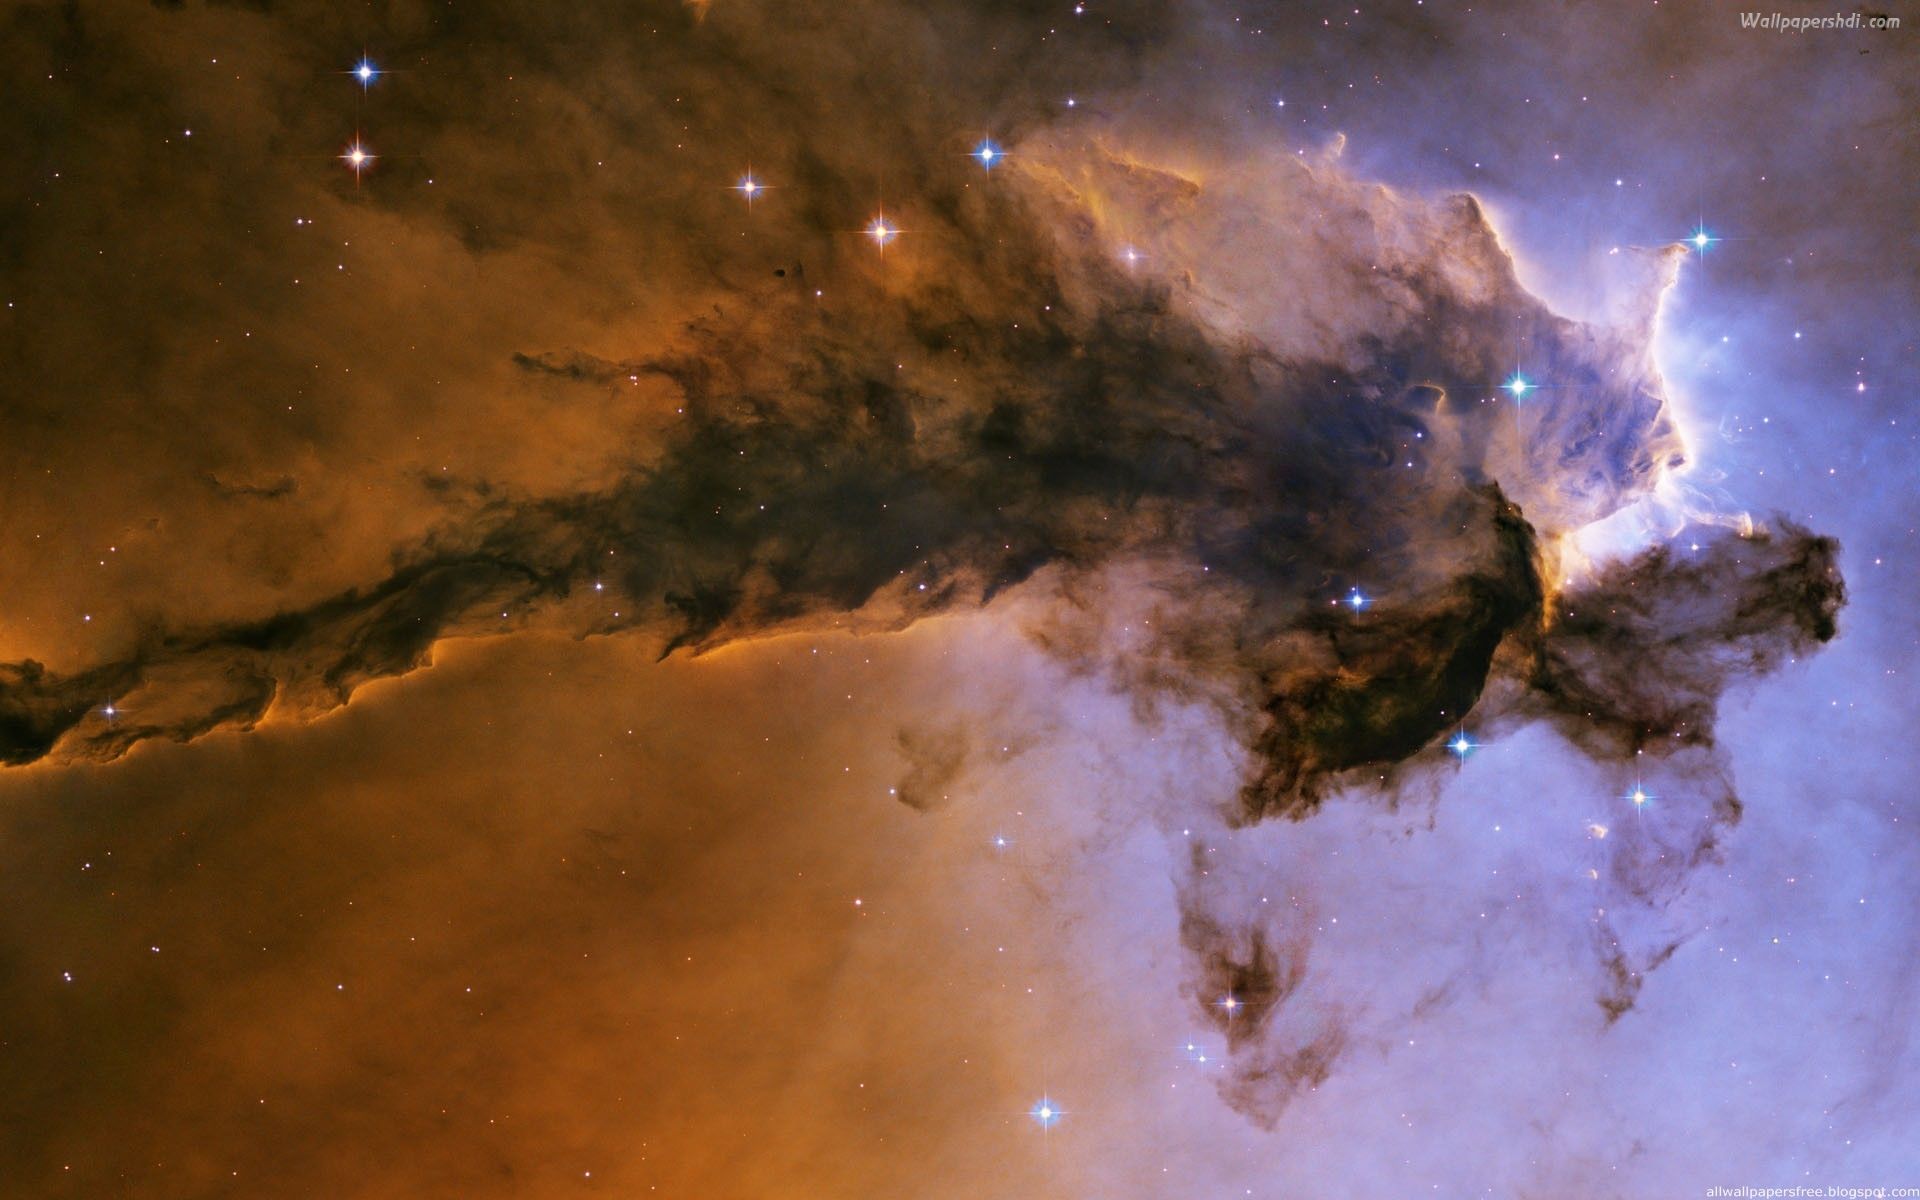 Hubble Background Wallpaper - Pics about space